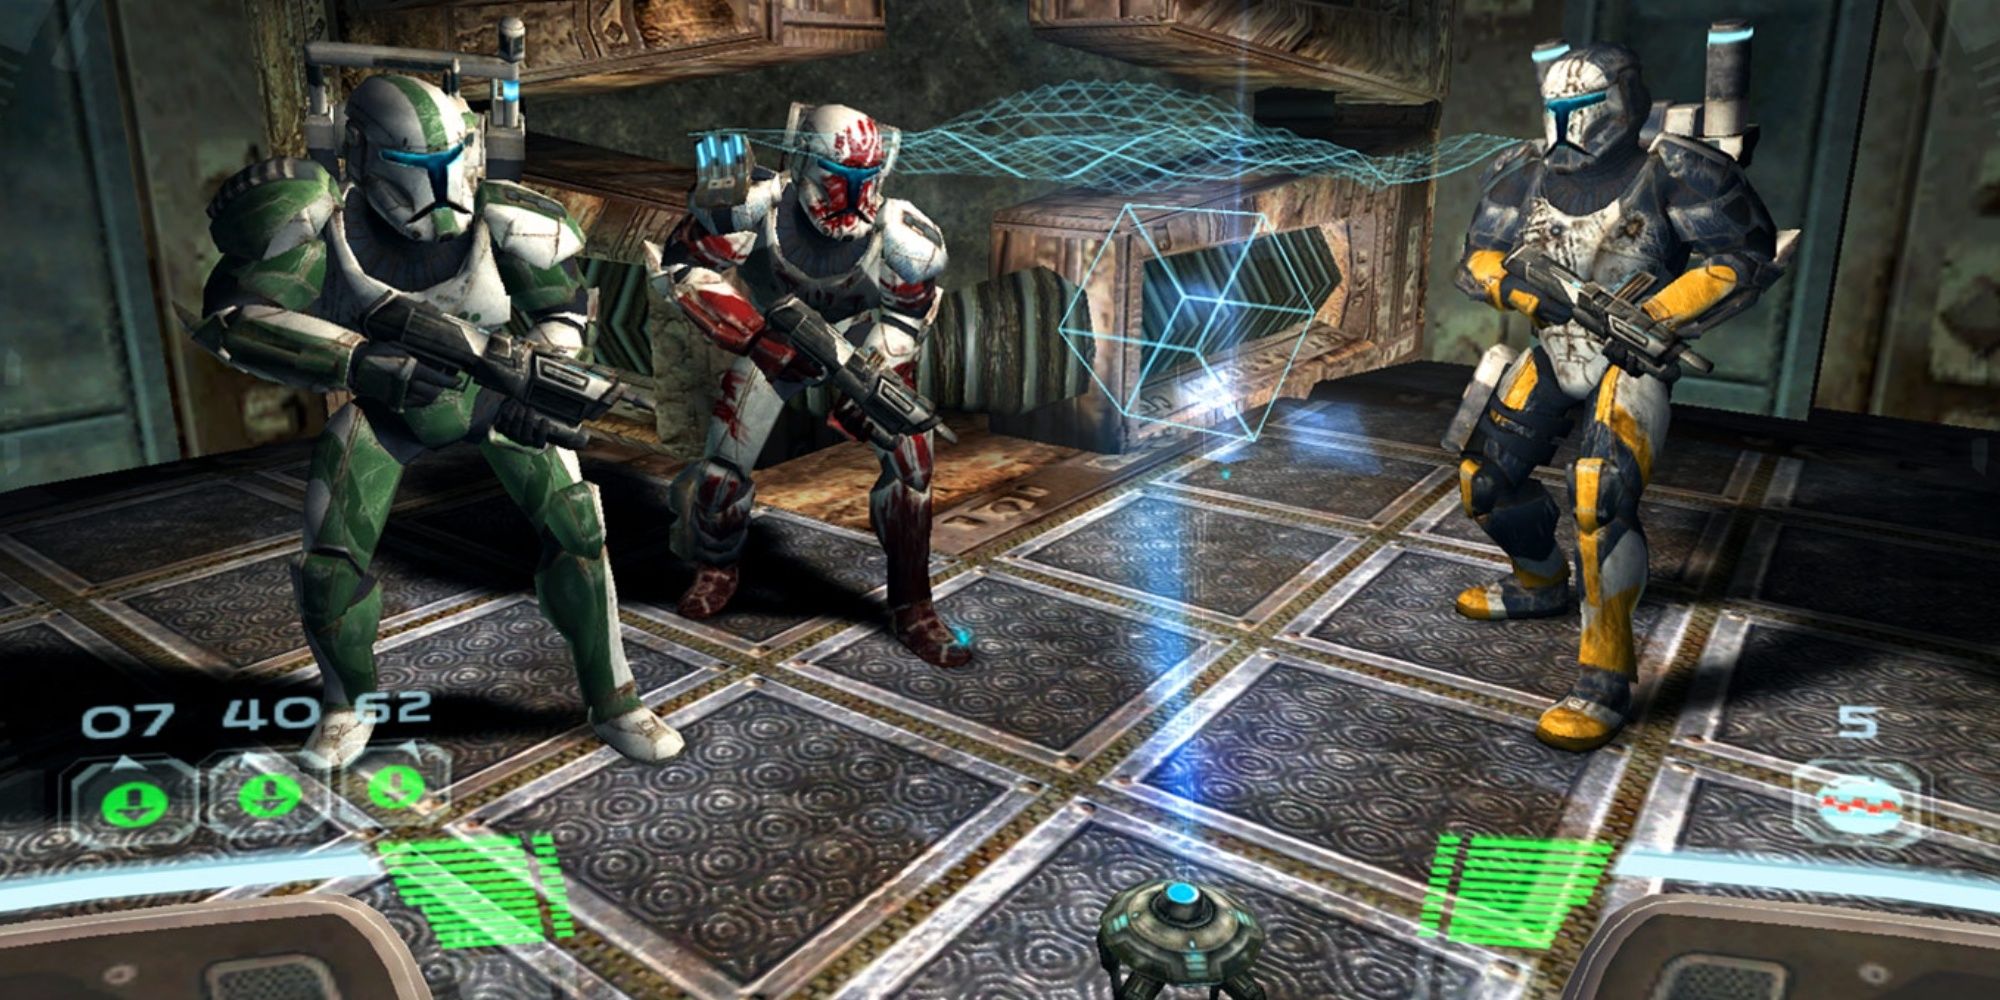 Delta Squad's 07, 40, and 52 prepare to drop out of a Republic ship for their mission in Star Wars: Republic Commando.